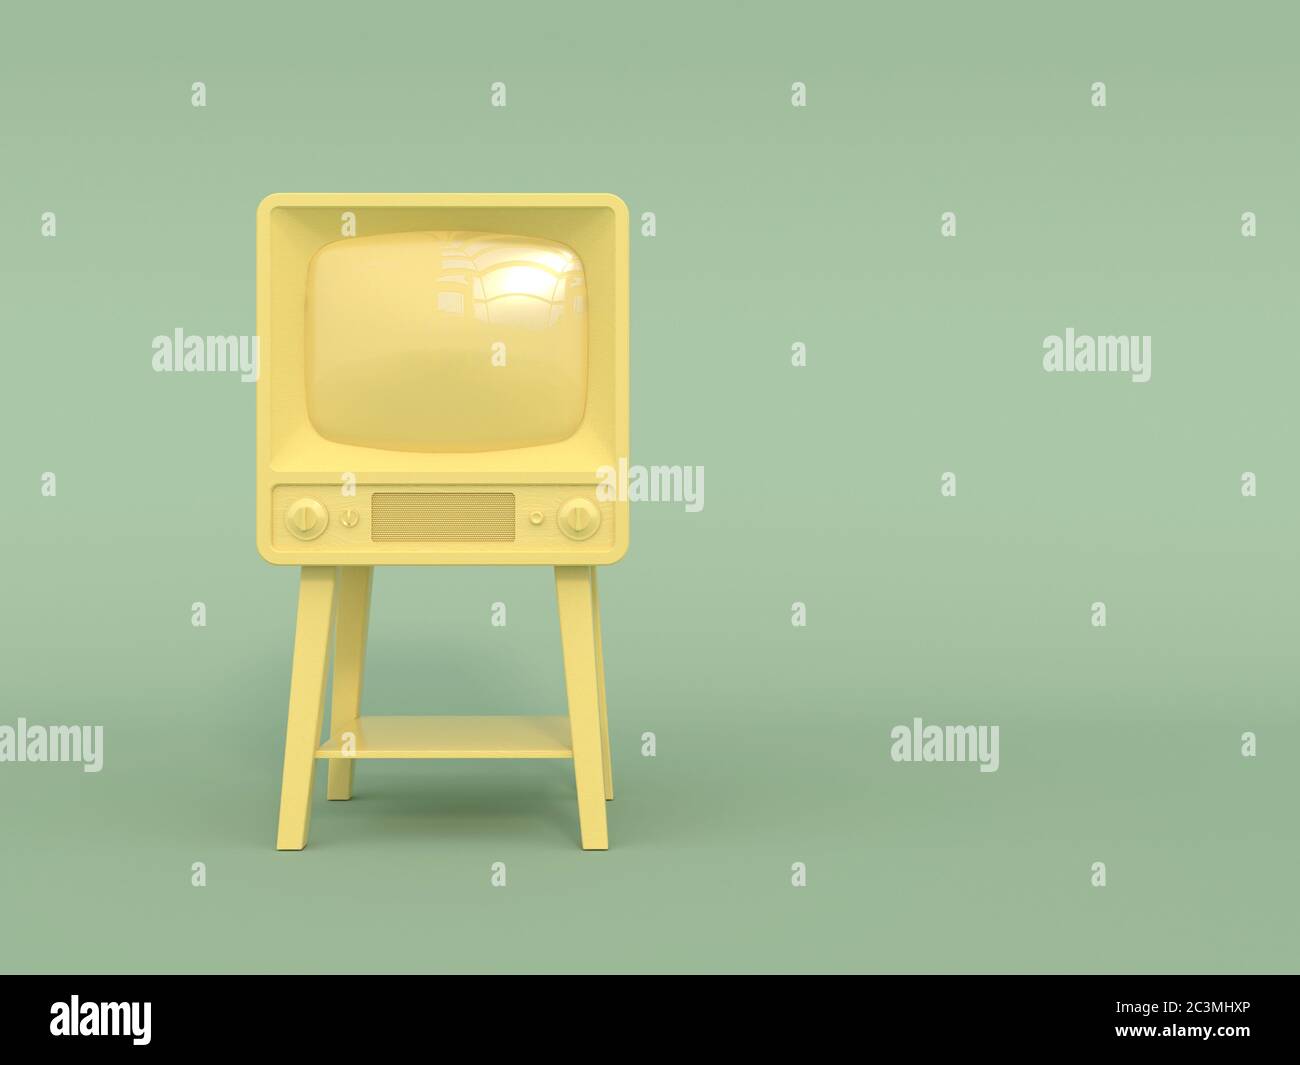 Old retro tv in monochrome yellow color on a light green background. Pastel colors. Copy space. Cartoon style. 3D illustration. Stock Photo